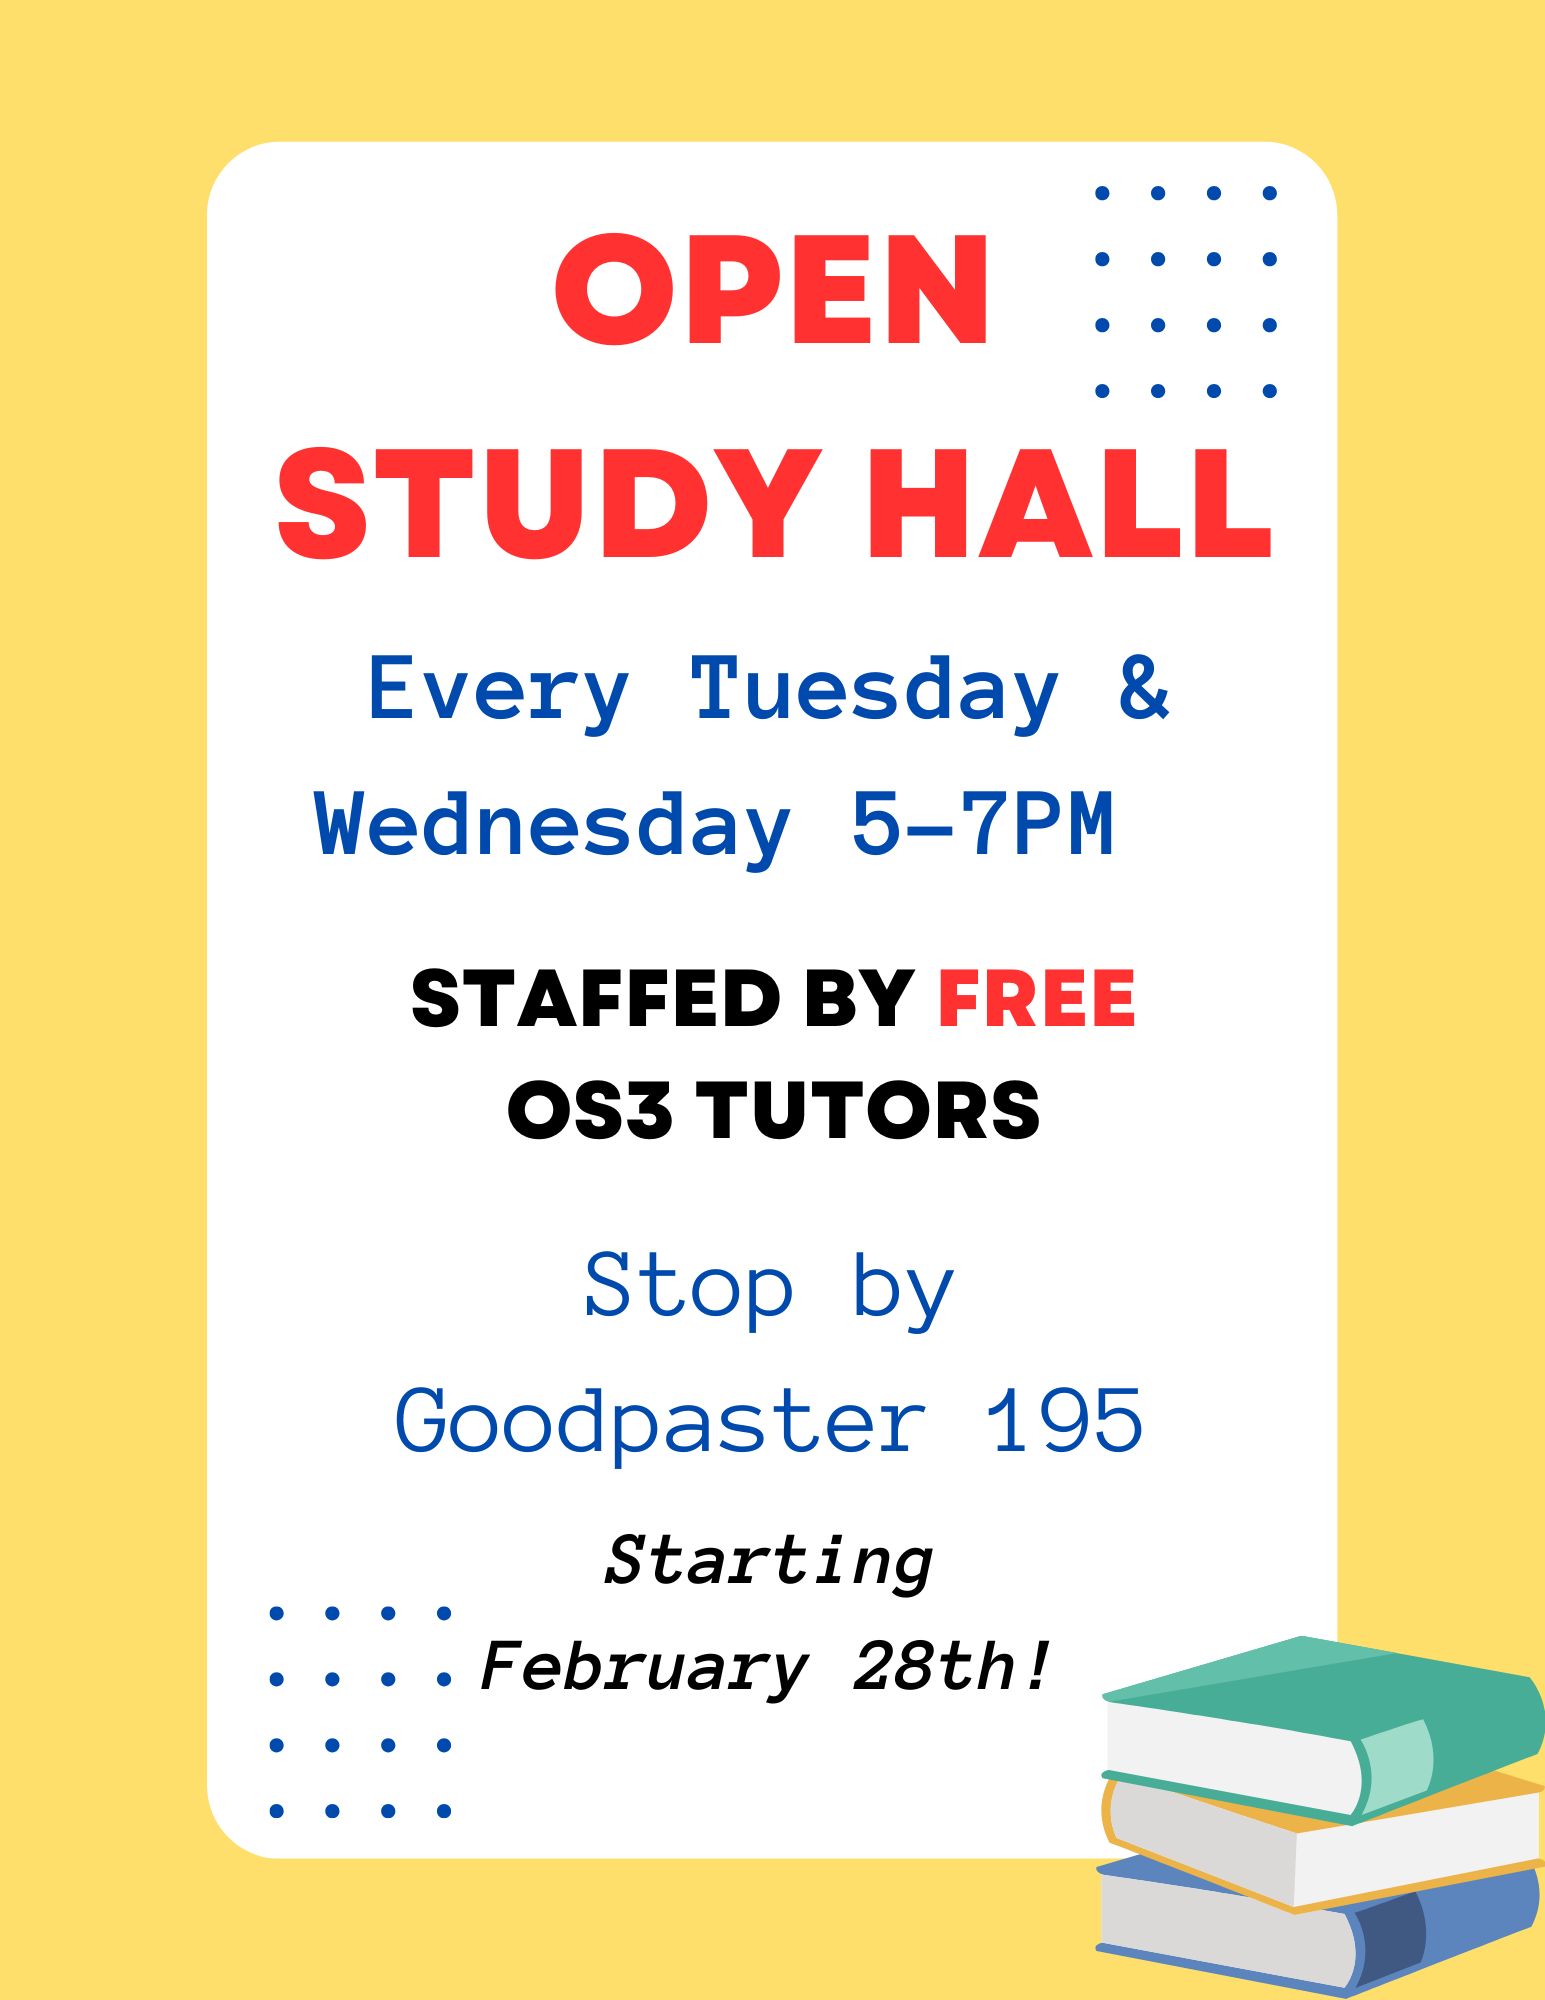 Open Study Hall Every Tuesday and Wednesday 5-7 PM in Good Paster 195